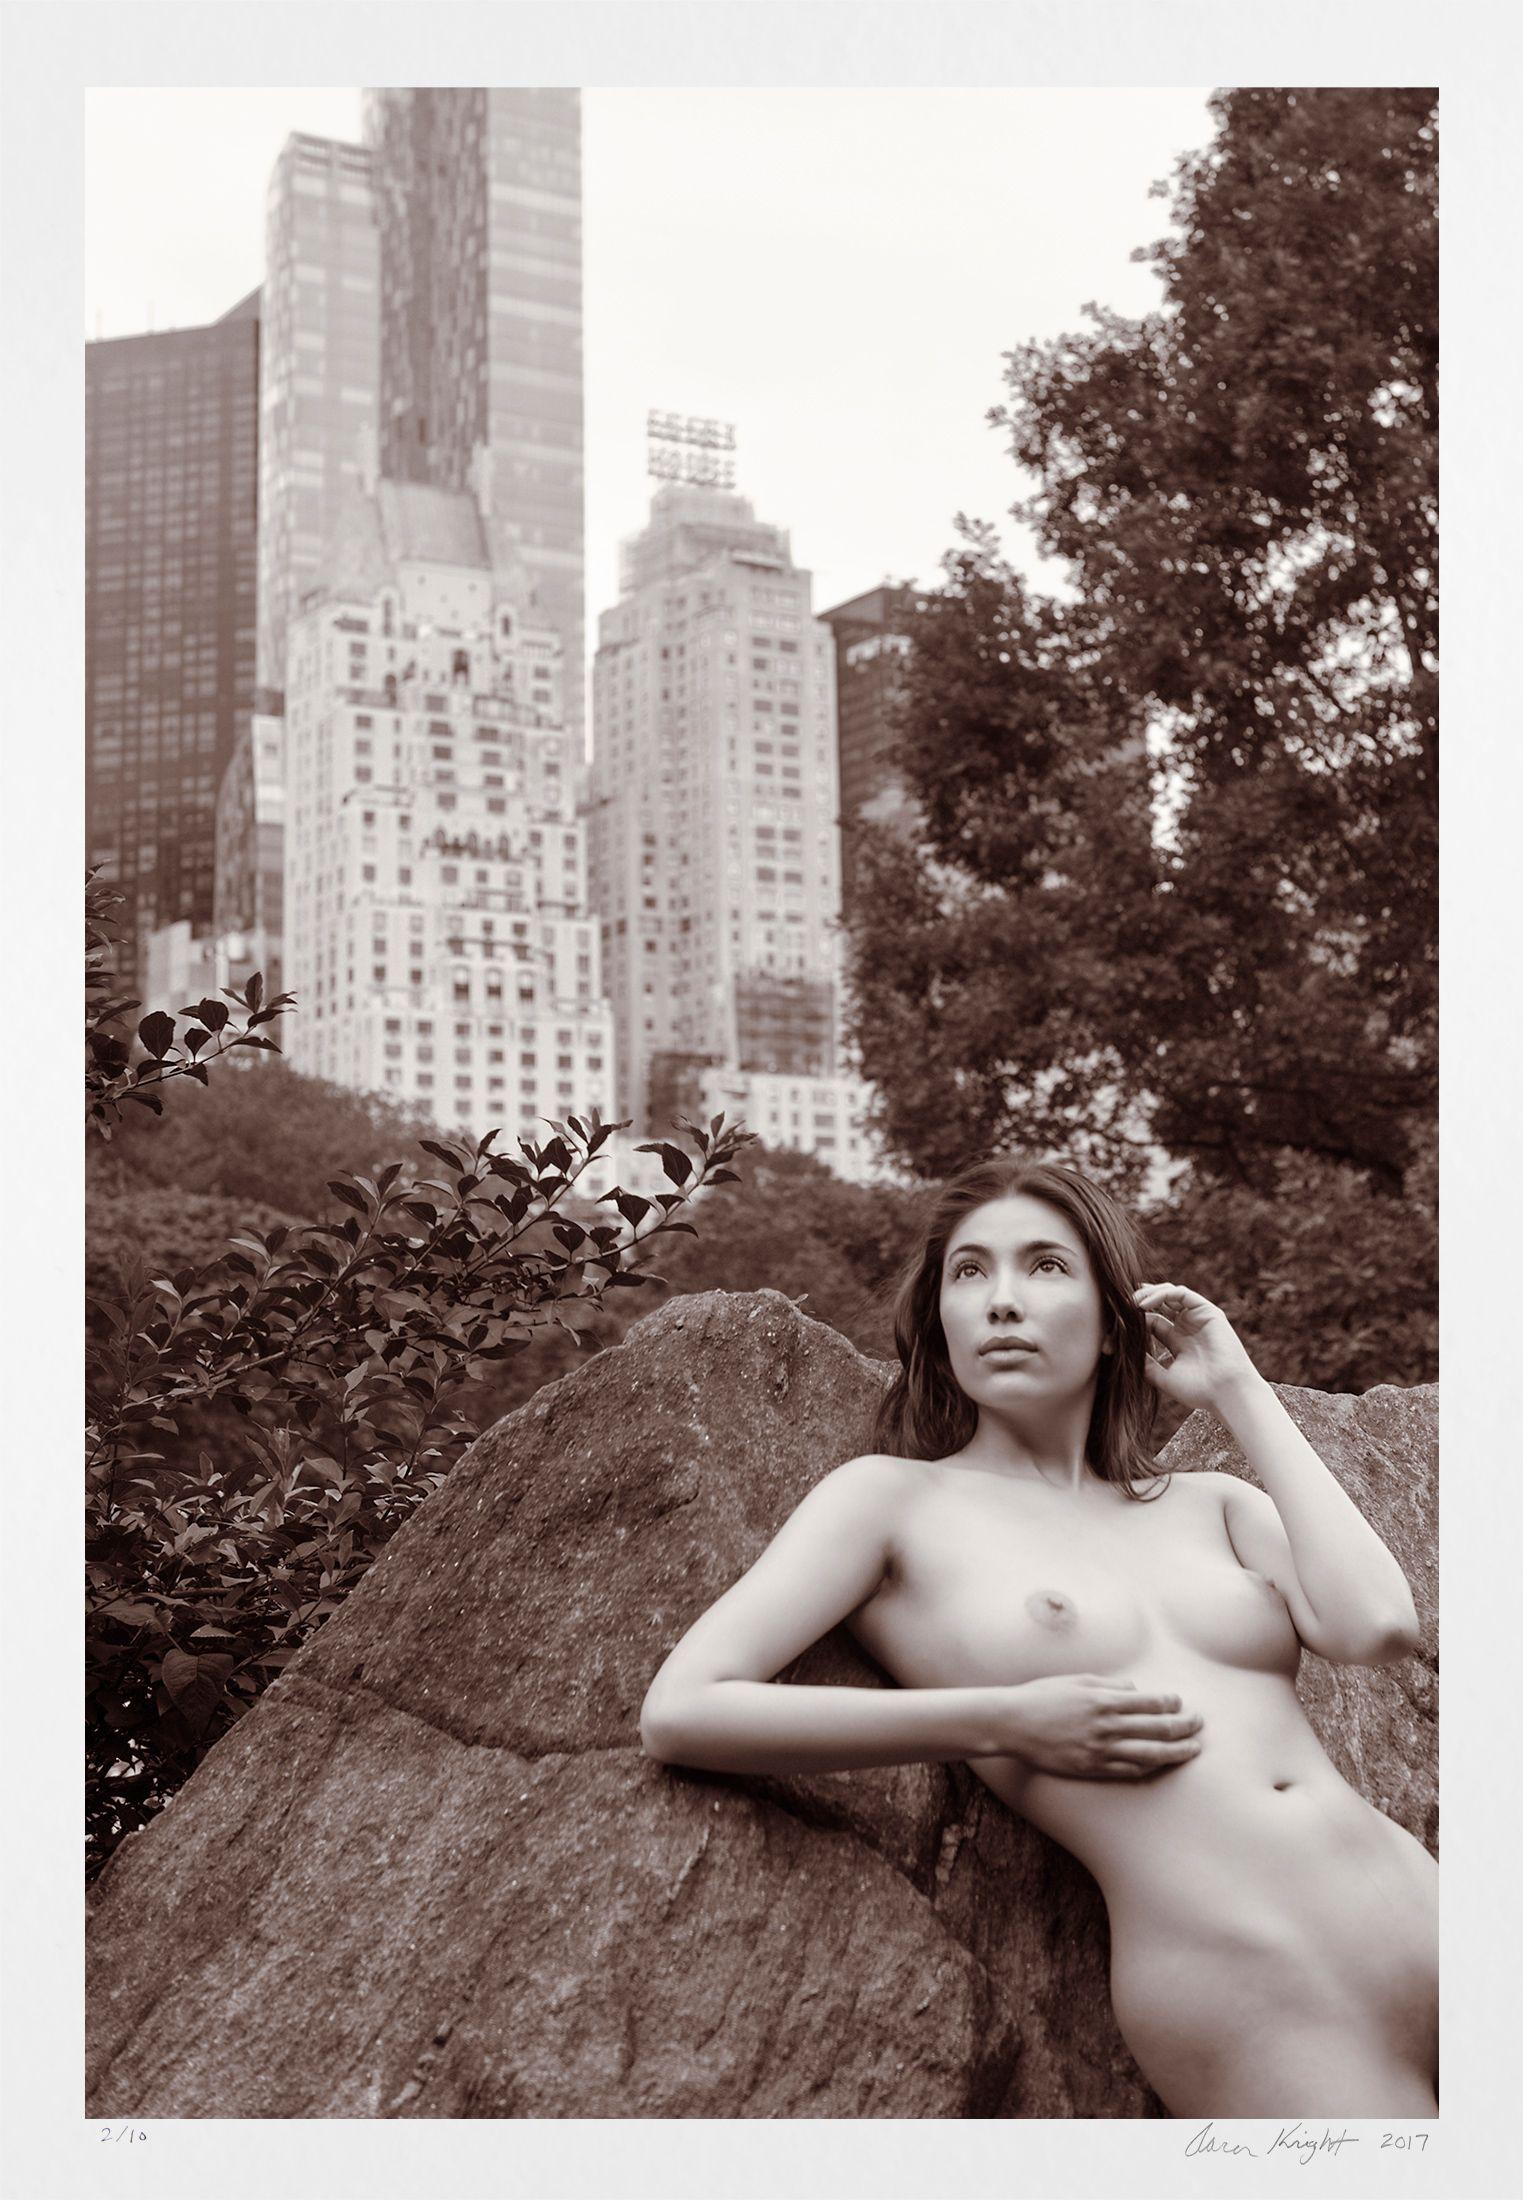 From a limited edition of 10 archival photographs.   Signed and numbered by artist Aaron Knight.   Photographed in New York Cityâ€™s Central Park on a Saturday morning. In the background, barely legible, is the sign atop Essex House, the 1931 luxury